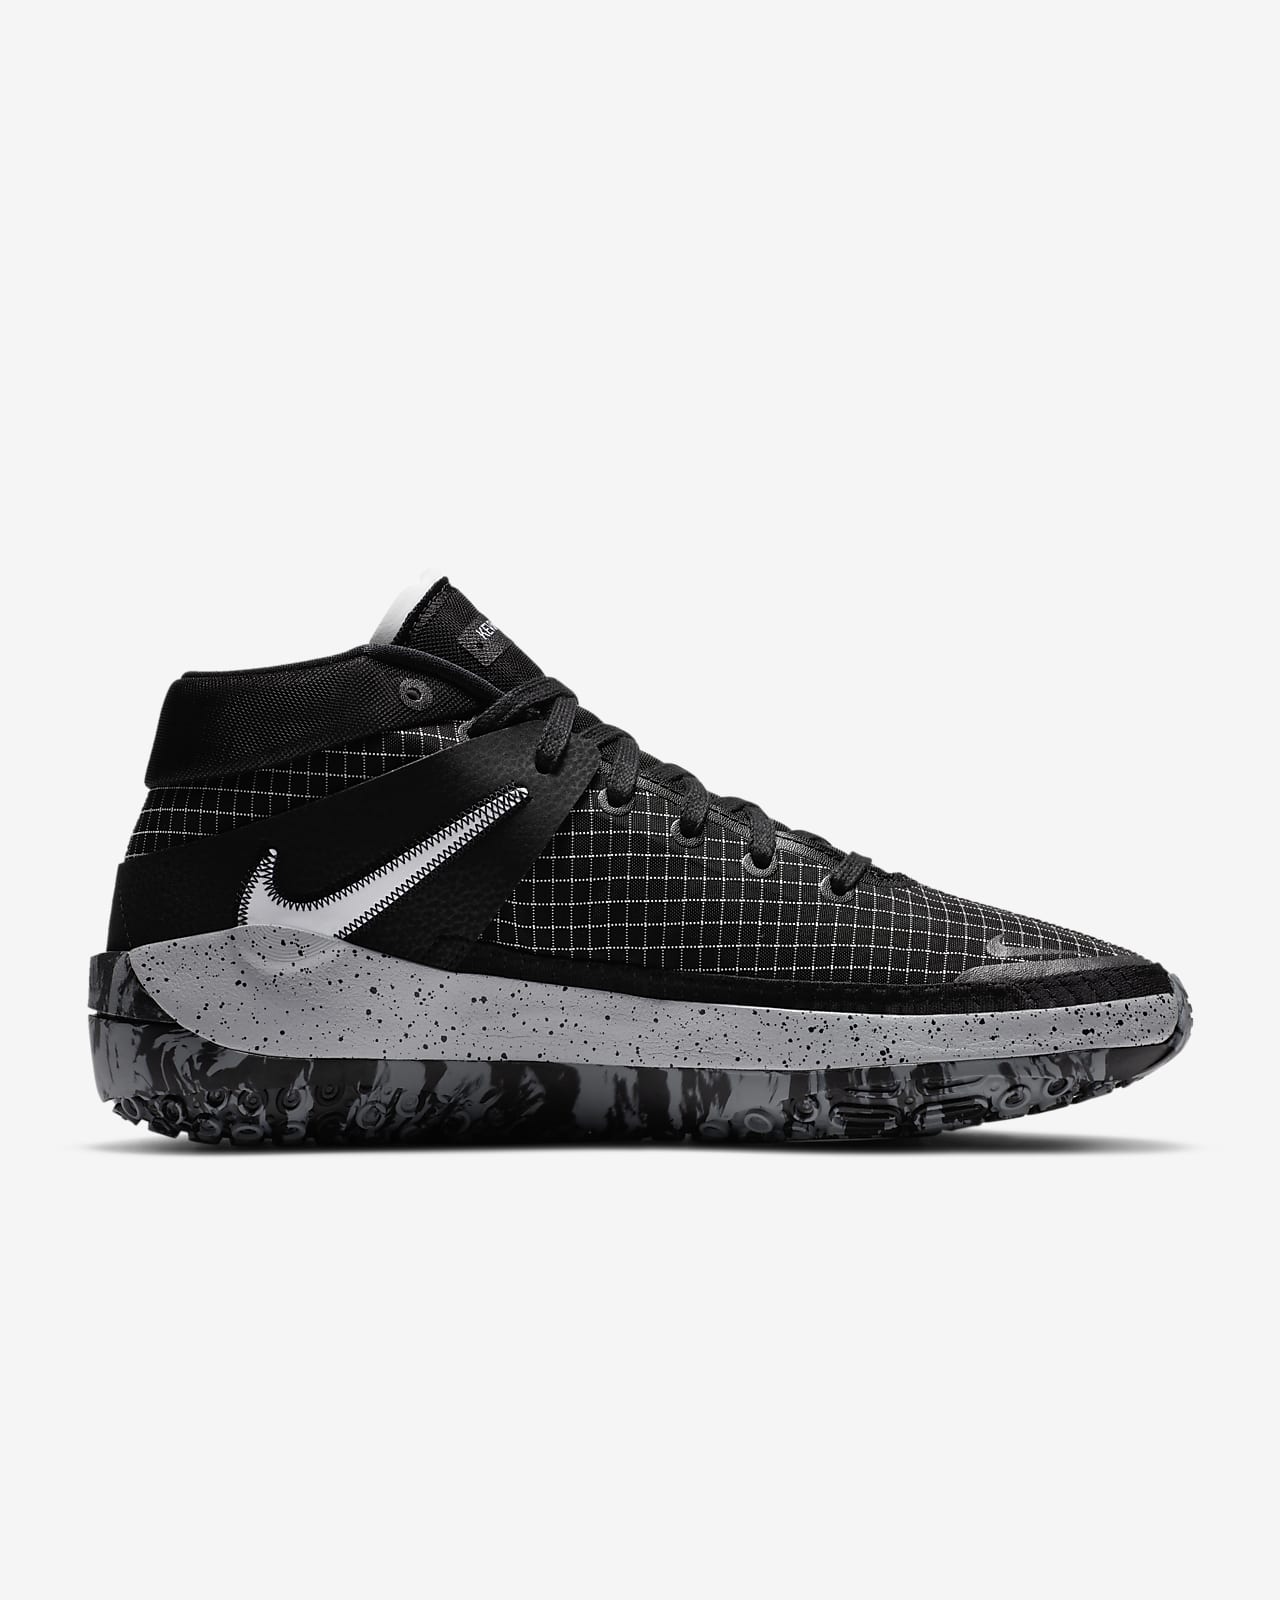 nike by you kd 13